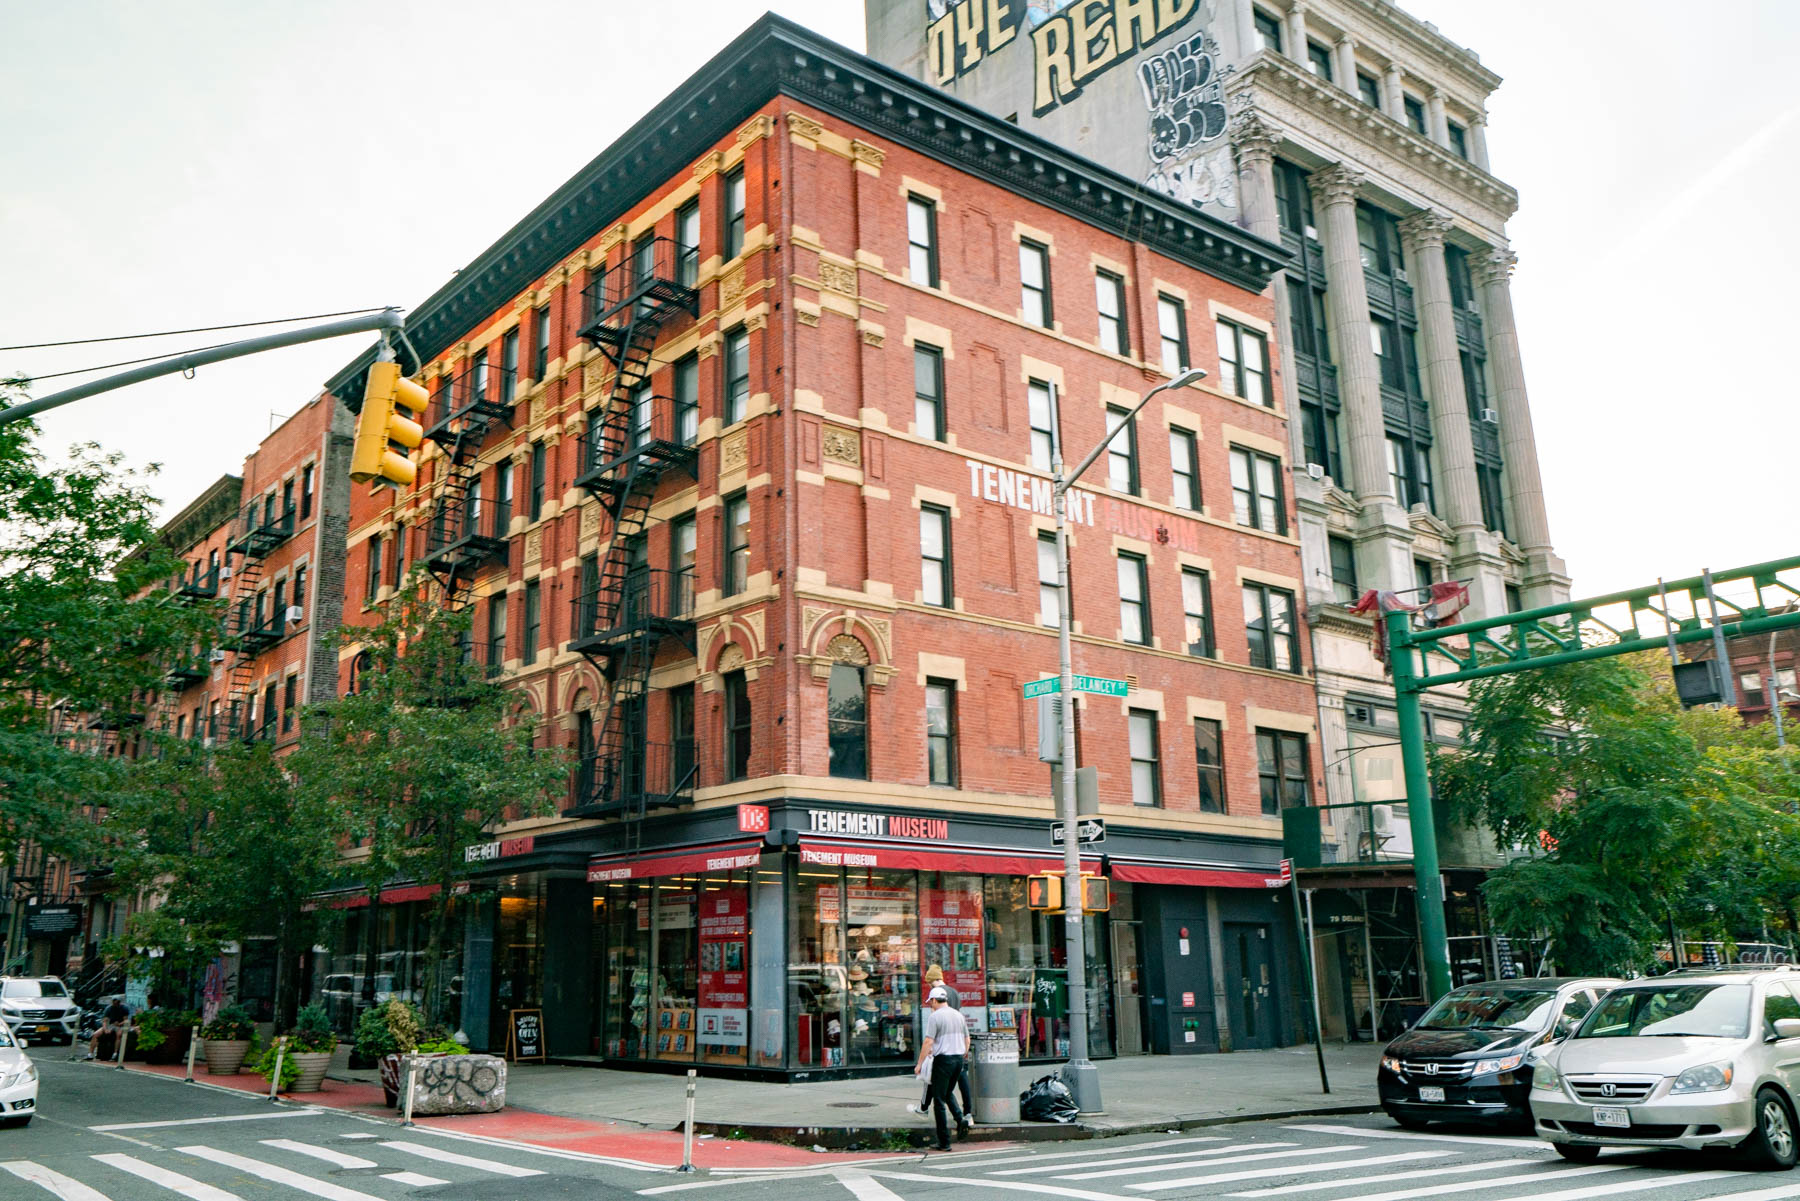 Tenement Museum NYC
Best museums in New York City